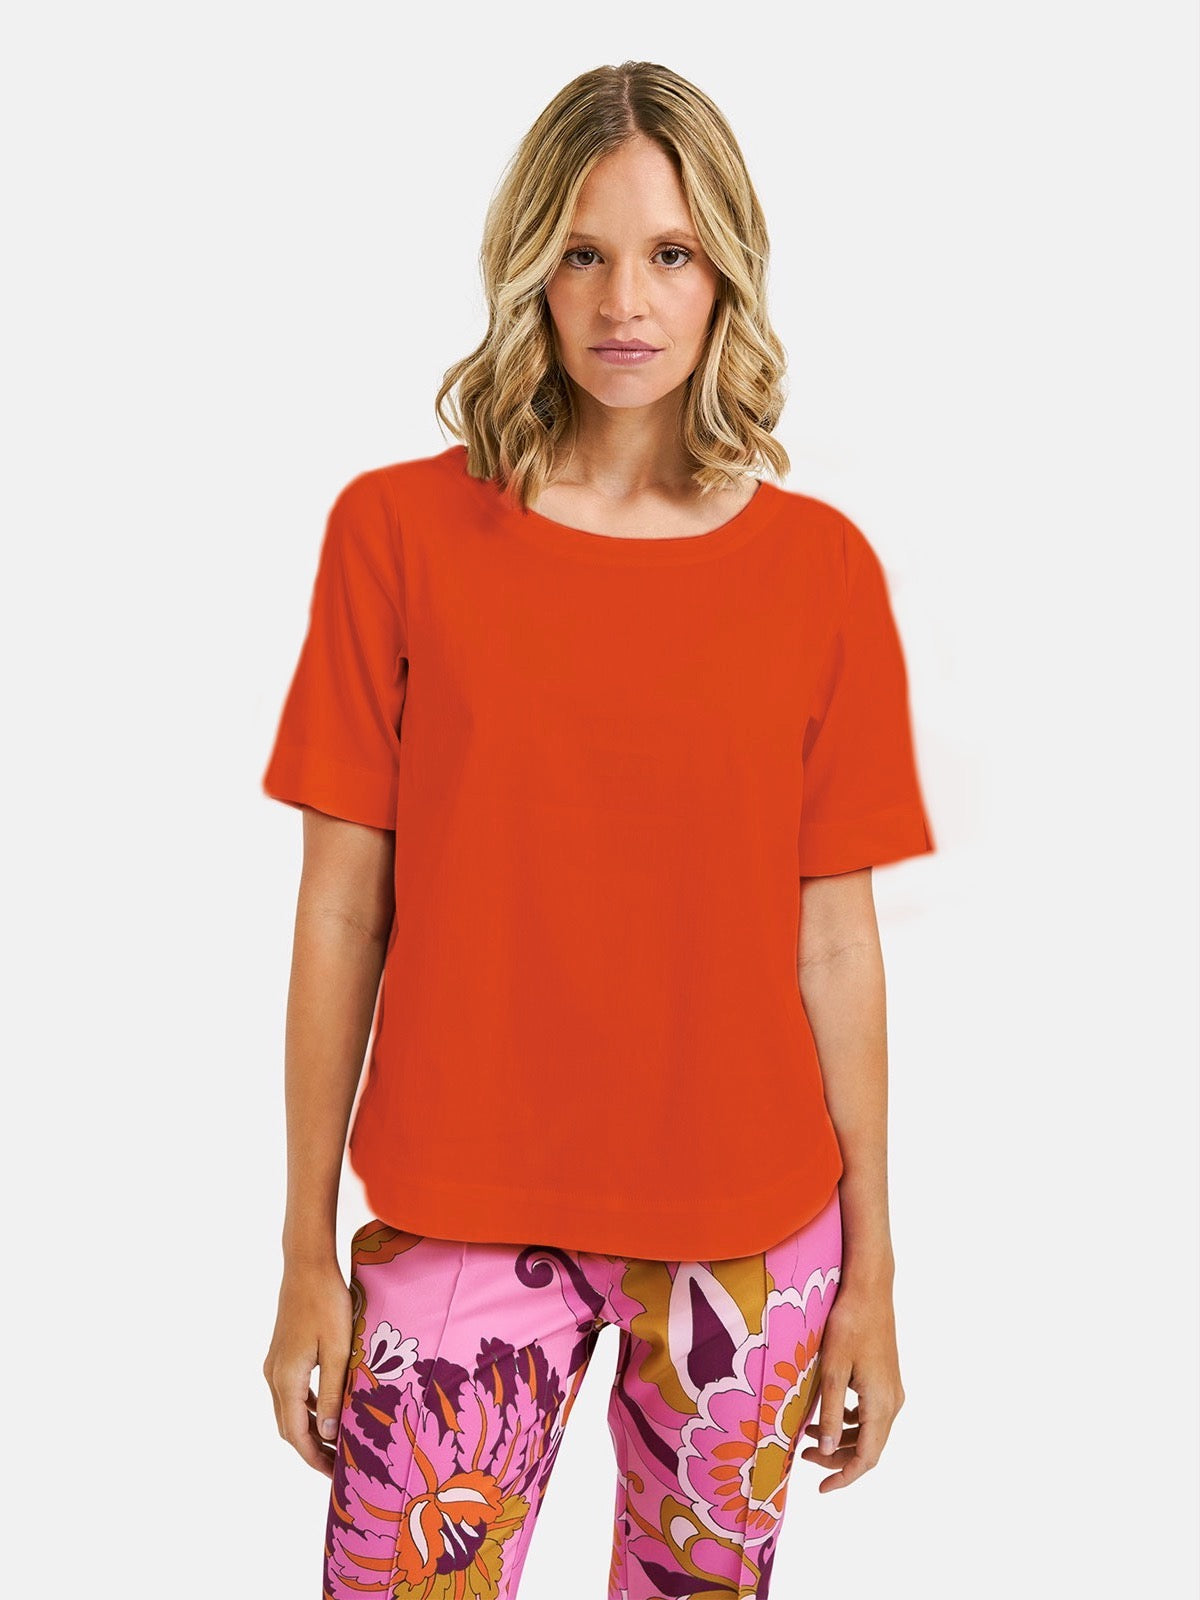 Hot Orange T-shirt with Round Neck Collar and 1/2 Sleeves